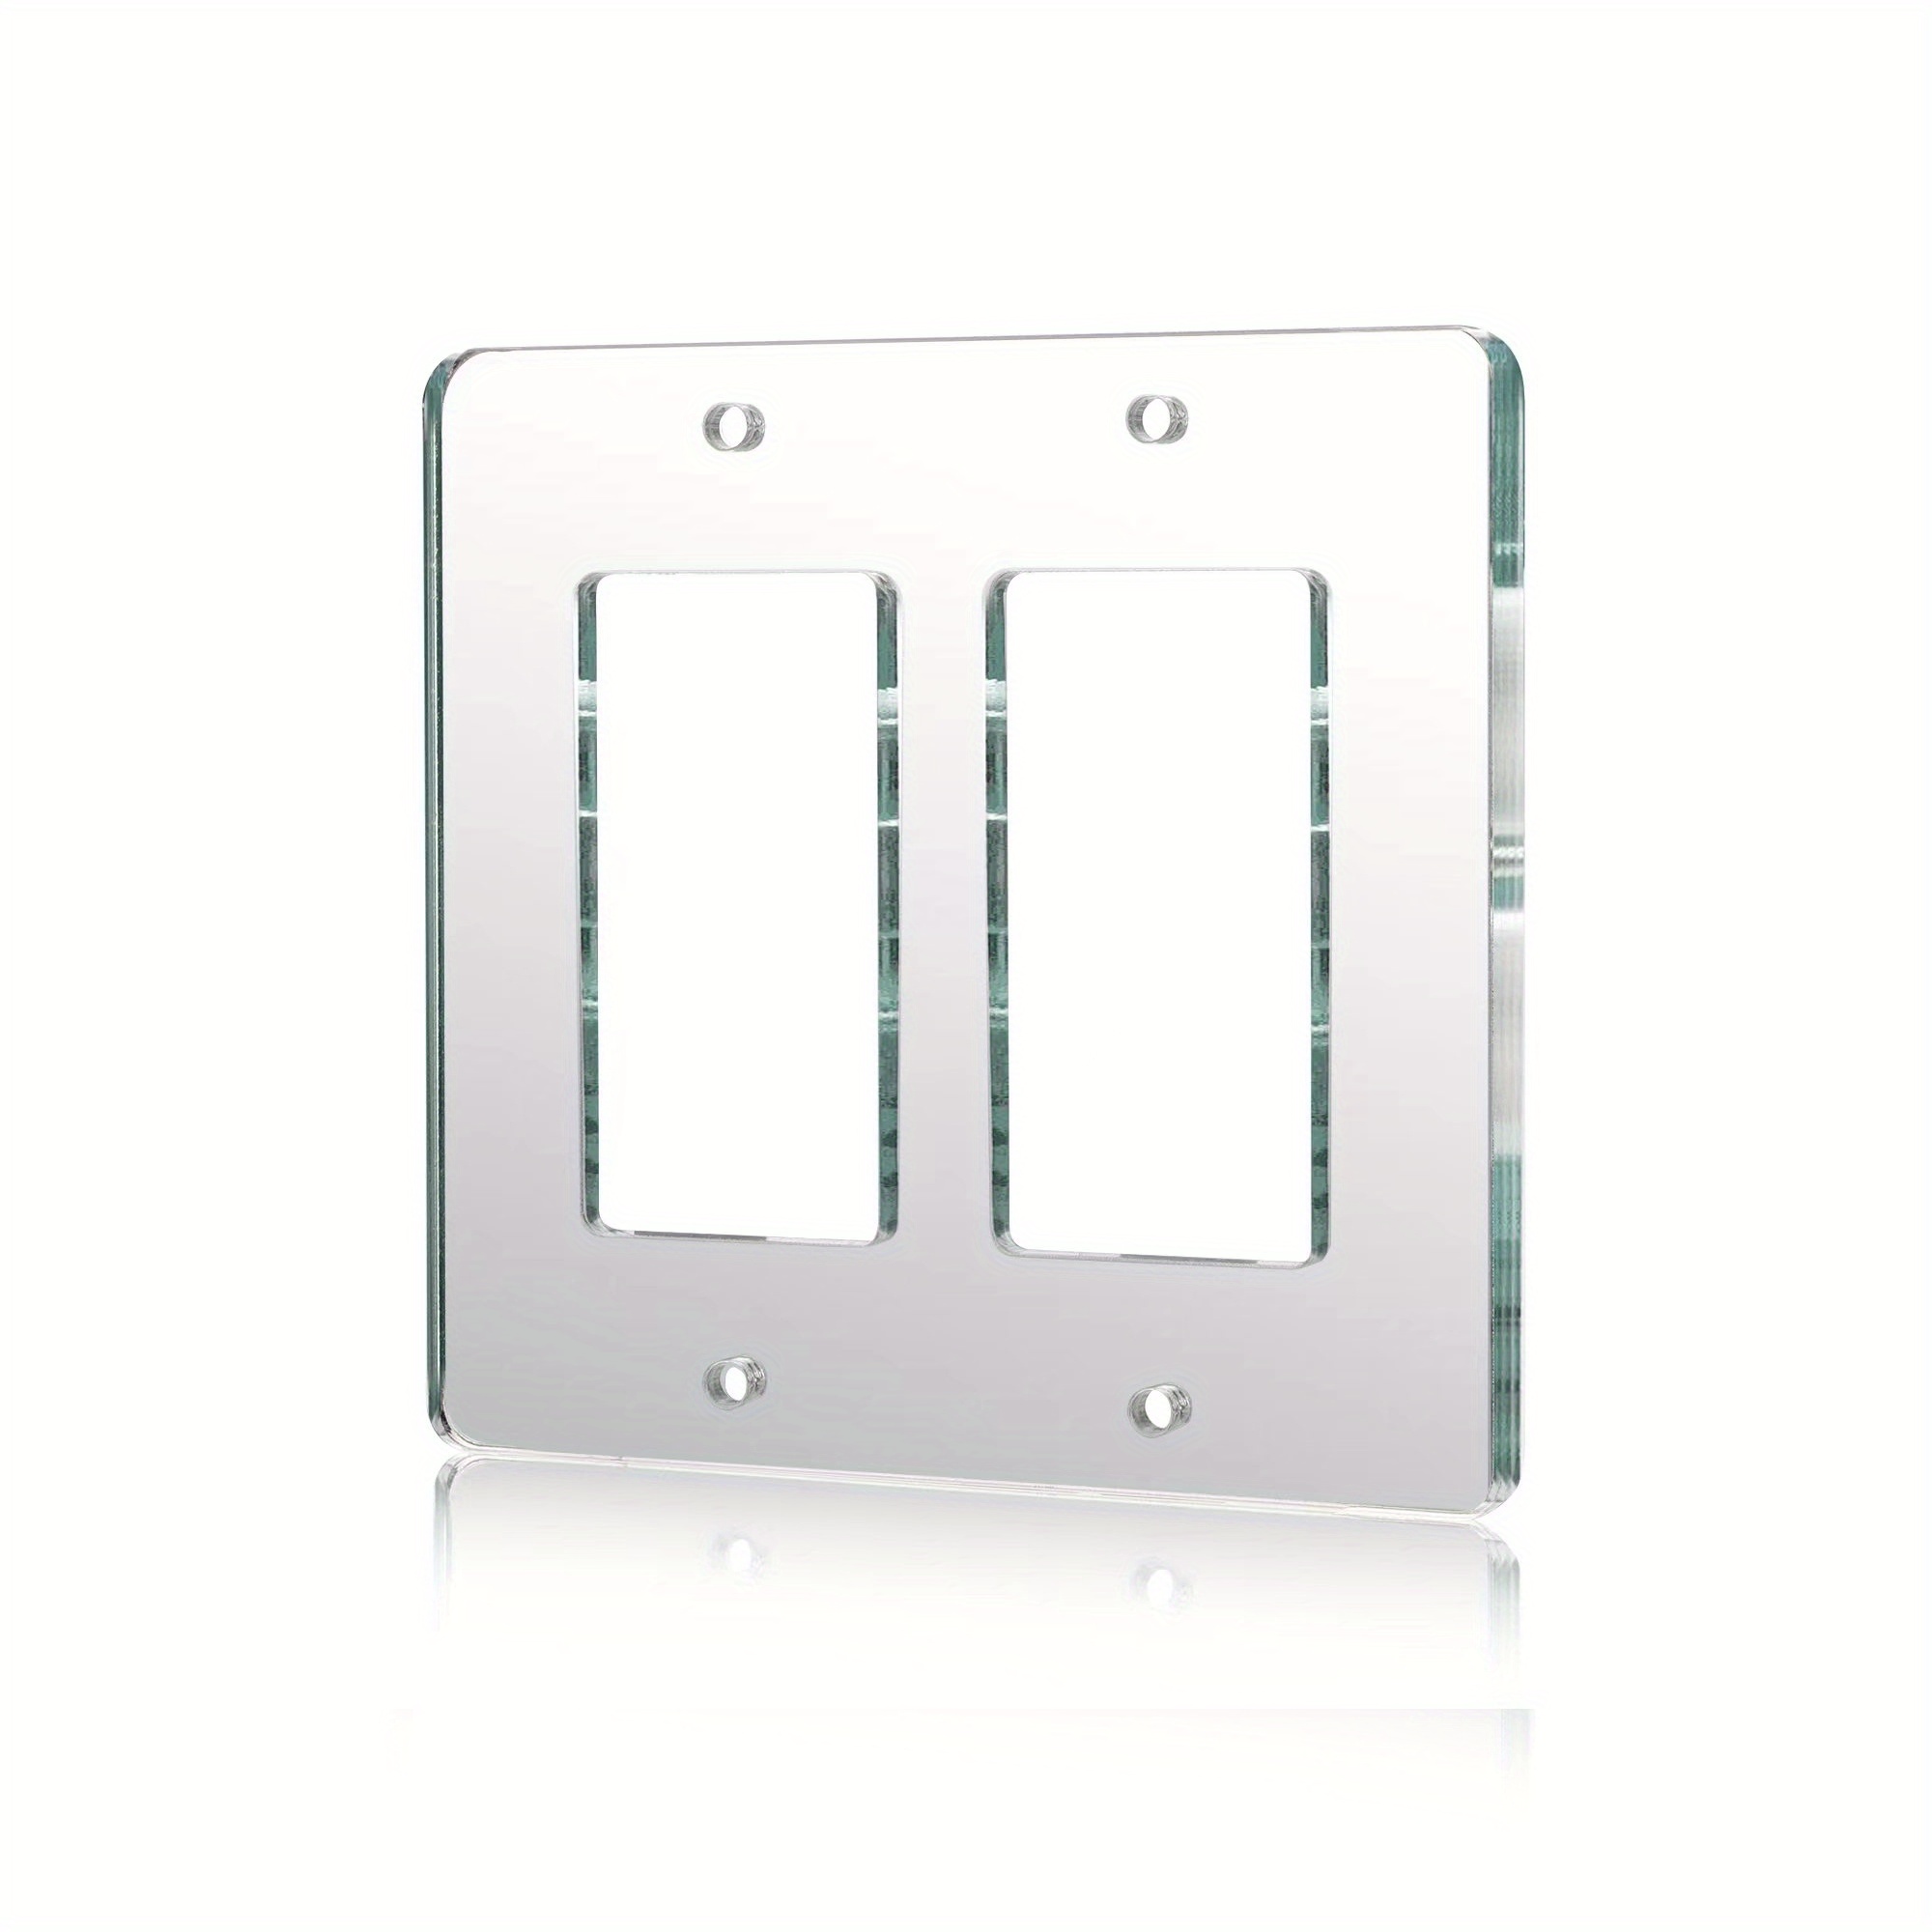 1pc mirror light switch plates single rocker 4 72 x 2 91 switch light cover durable wall plates decorative outlet covers acrylic mirrored light switch cover